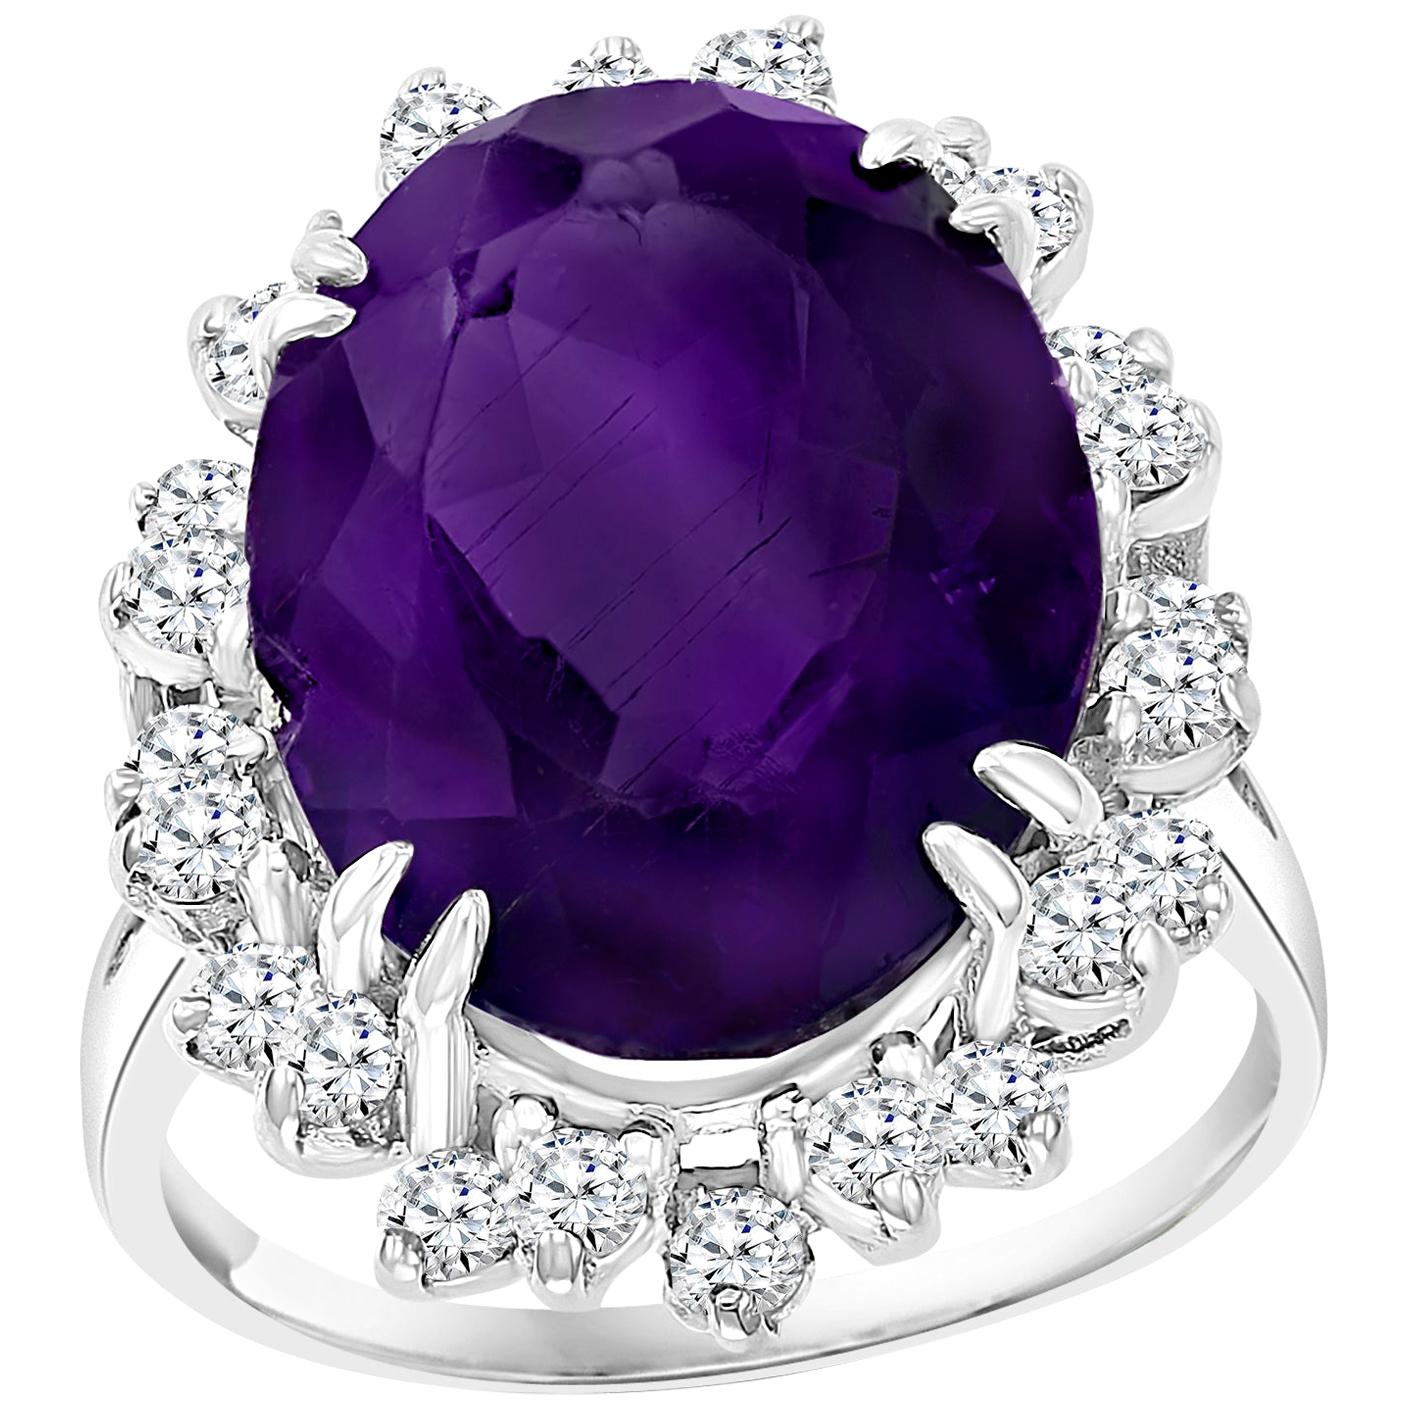 12.5 Carat Amethyst and Diamond Cocktail Ring in 14 Karat White Gold 1970s For Sale